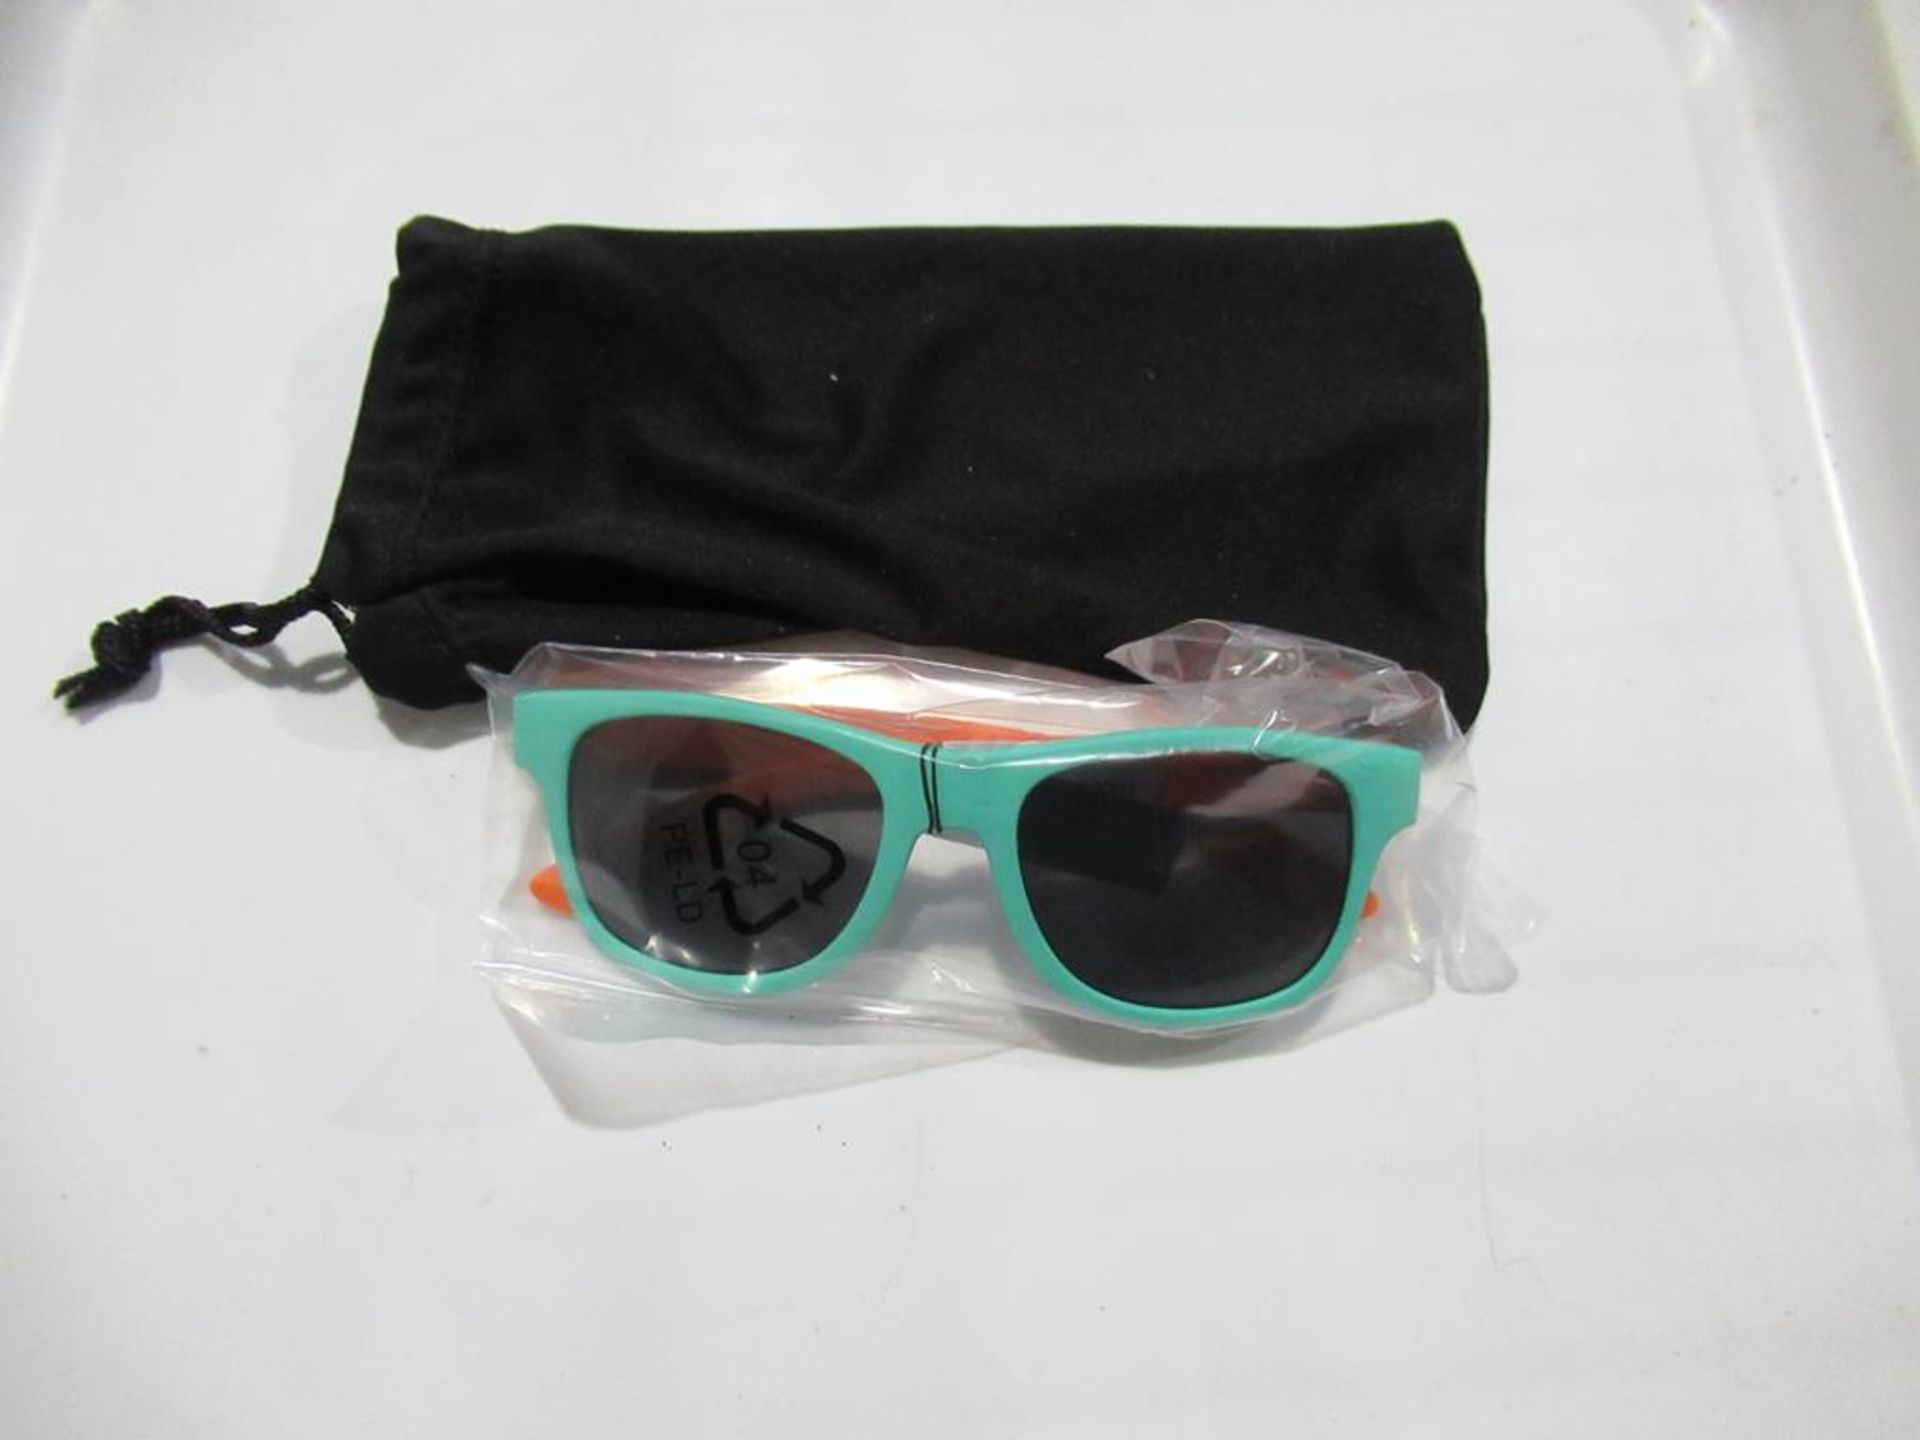 5x Breo sunglasses total approx RP £140 - Image 2 of 3